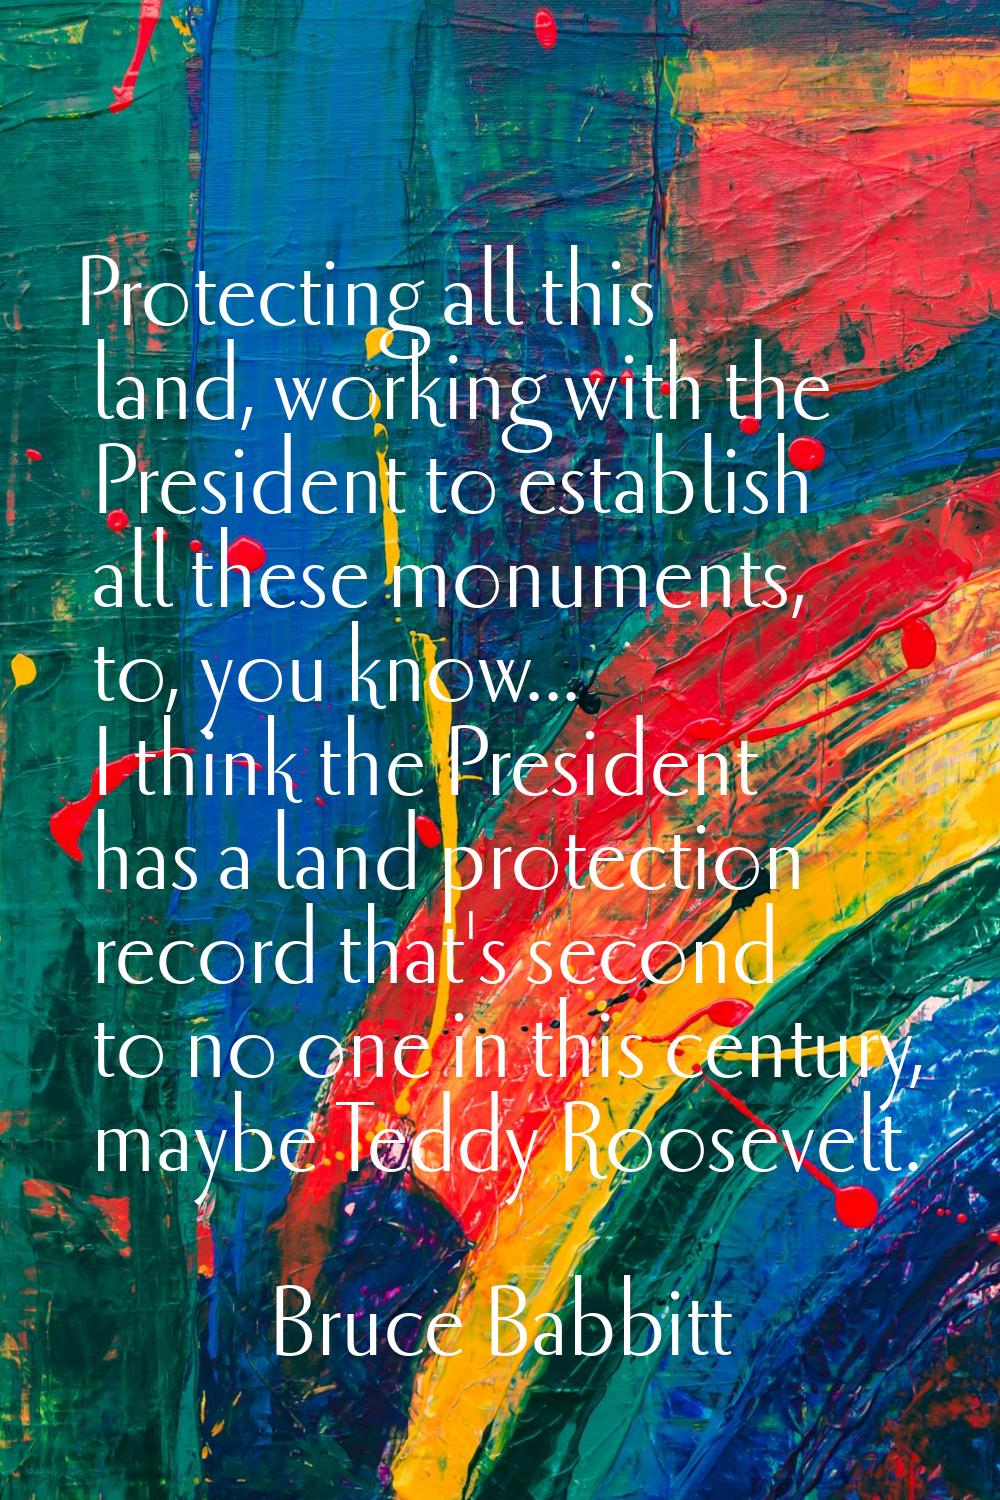 Protecting all this land, working with the President to establish all these monuments, to, you know